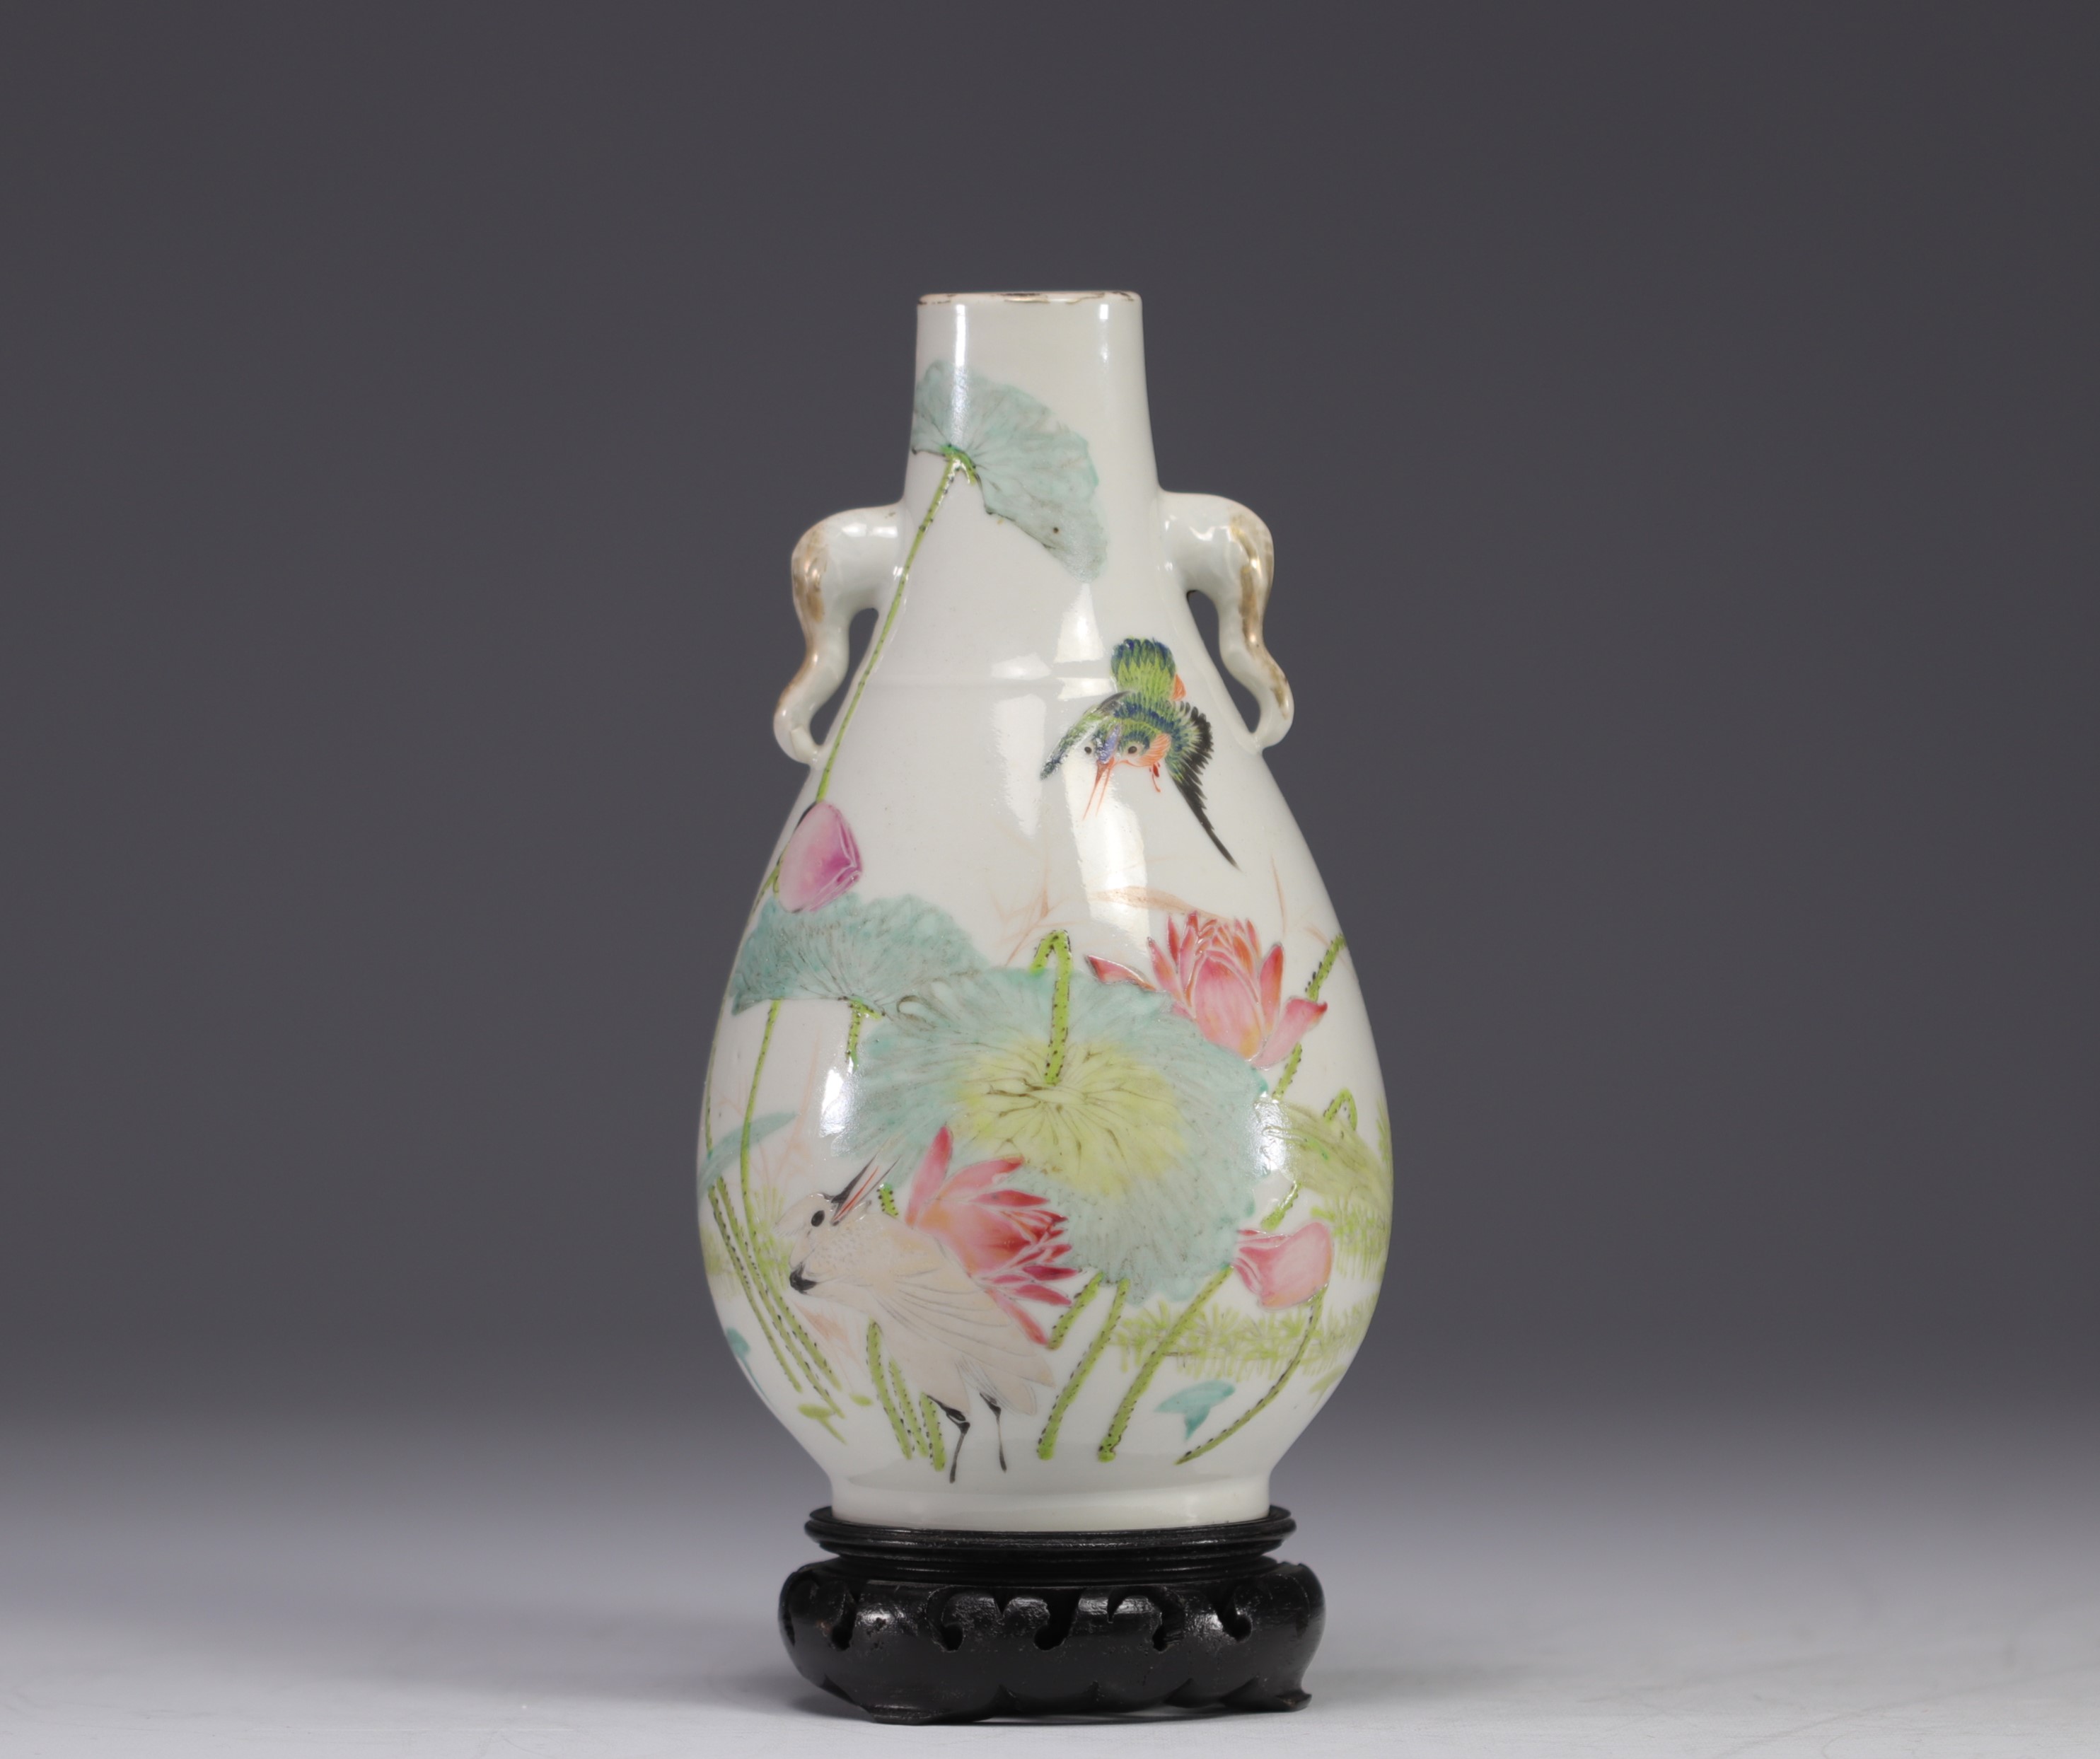 China, Qianjiang cai porcelain vase decorated with flowers and birds, 19th century.